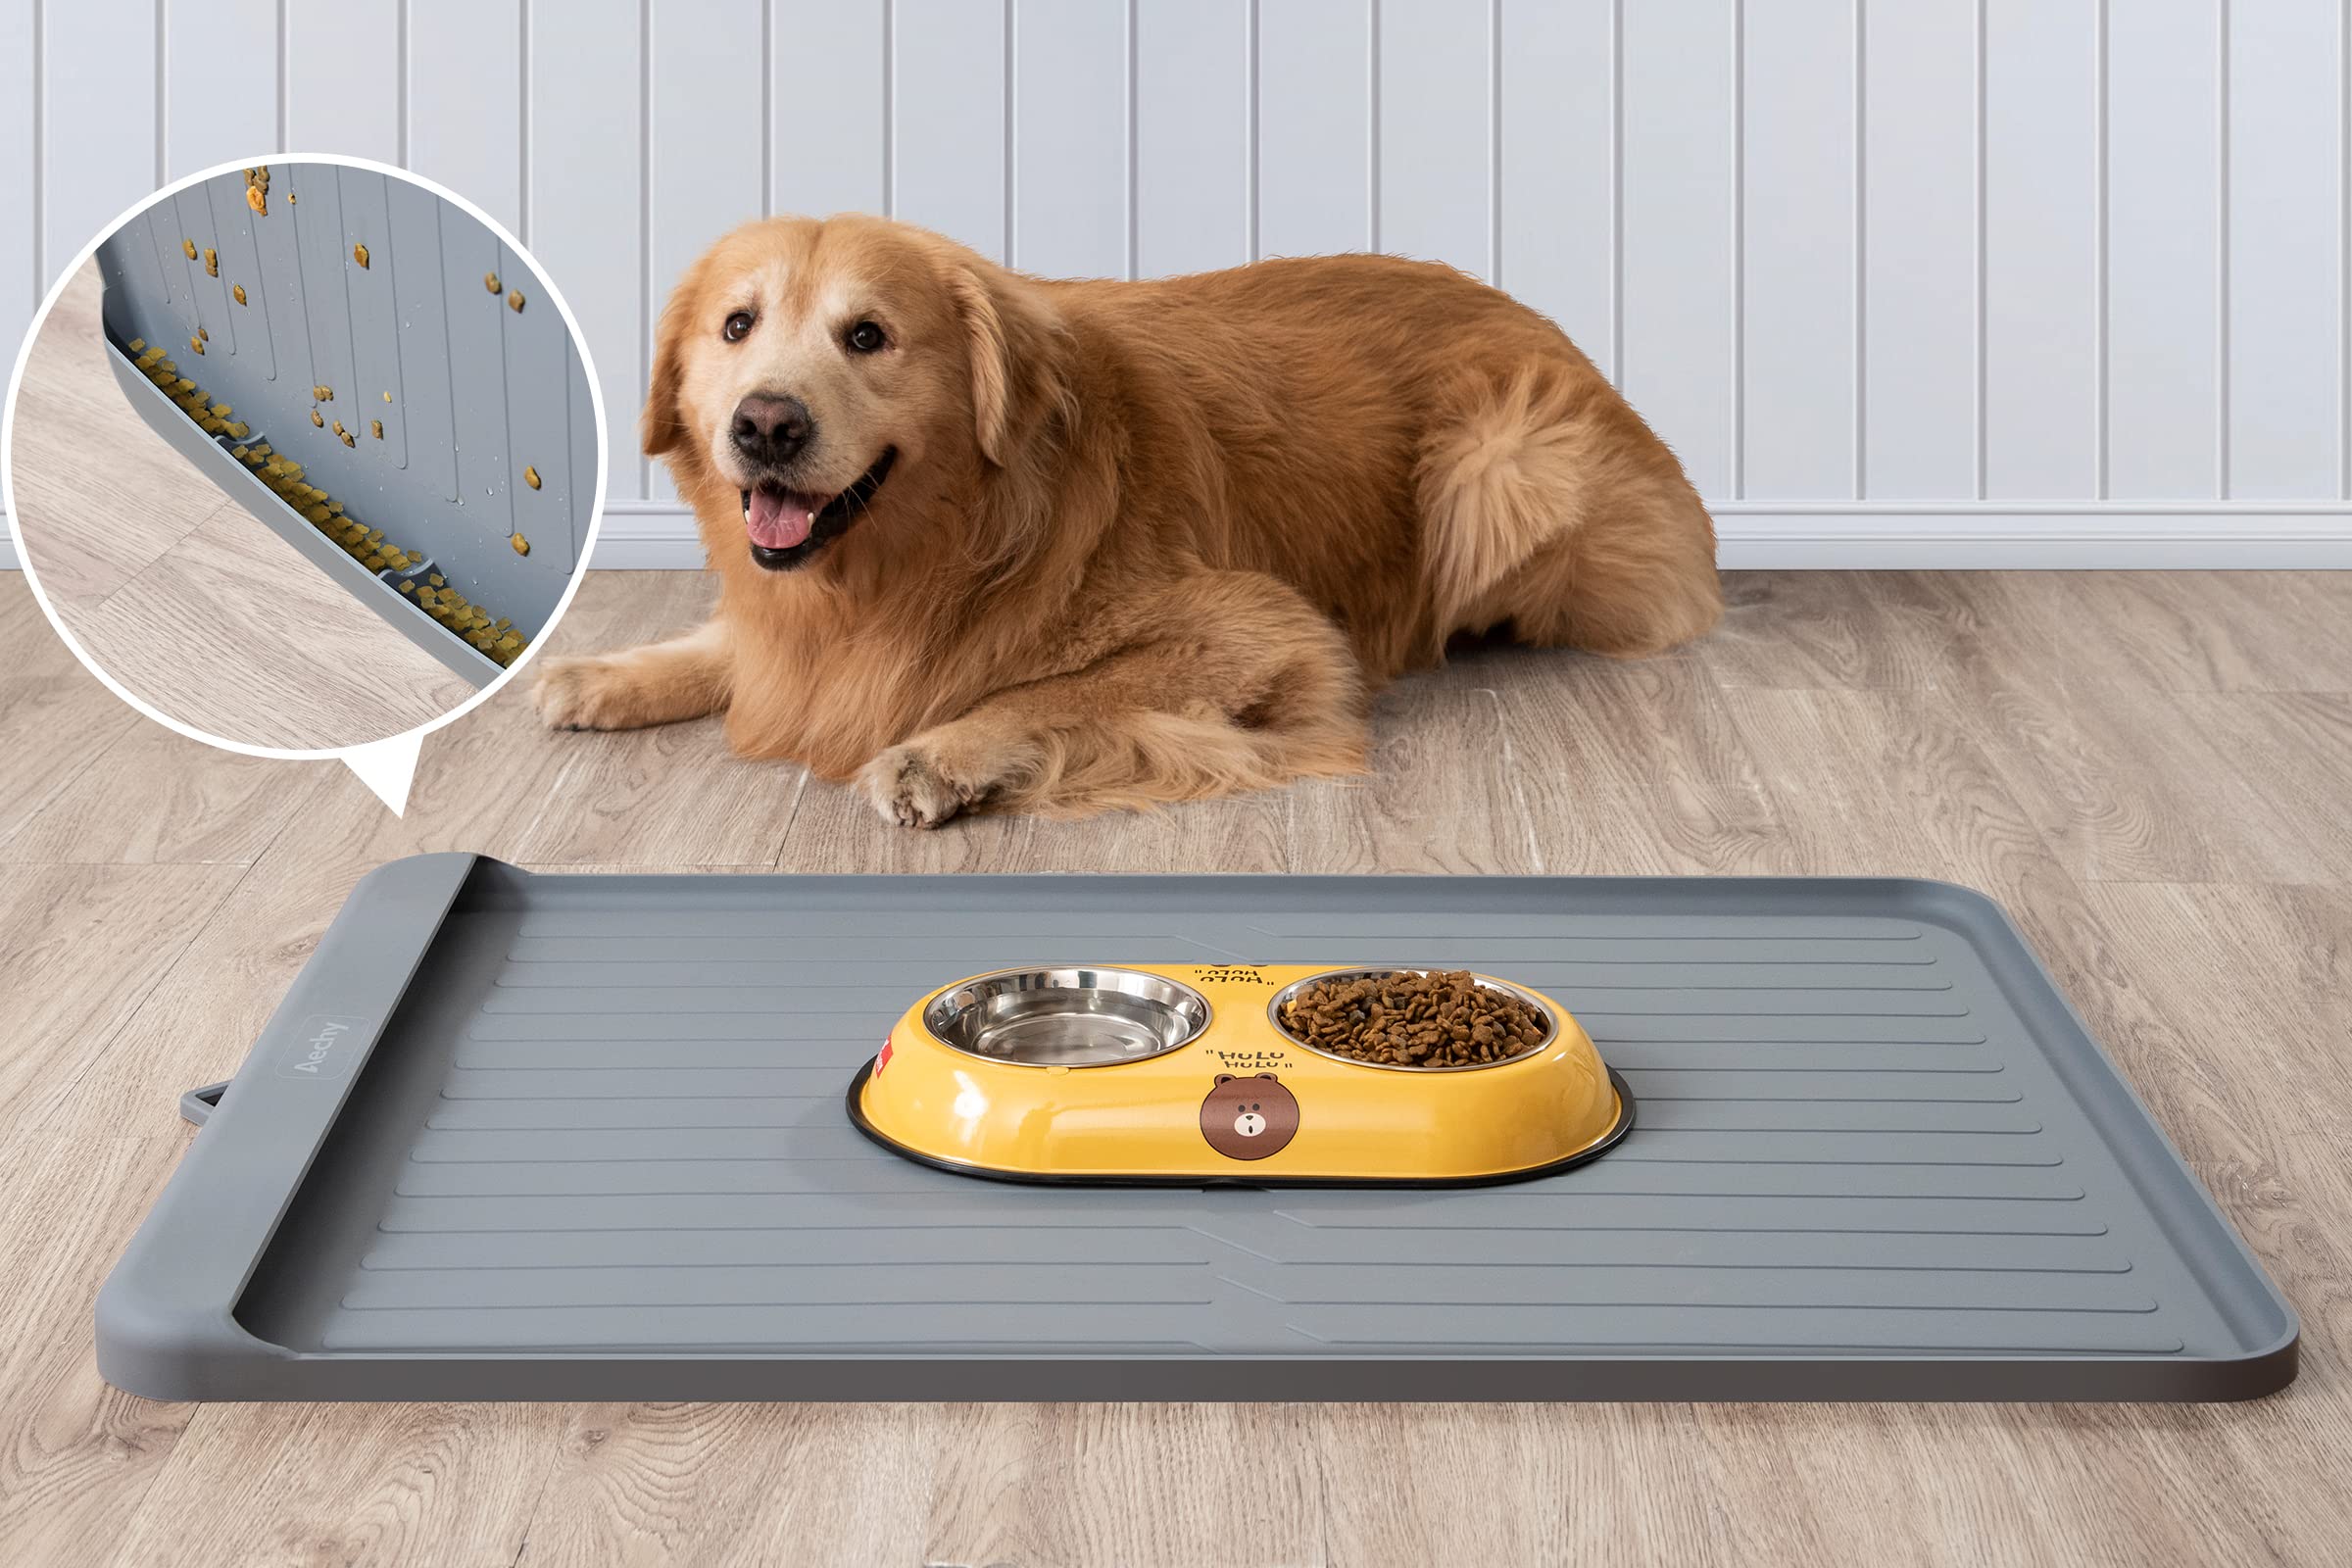 Dog Cat Food Mat, 36 X 24 Dog Mat for Food and Water, Waterproof Silicone  Pet